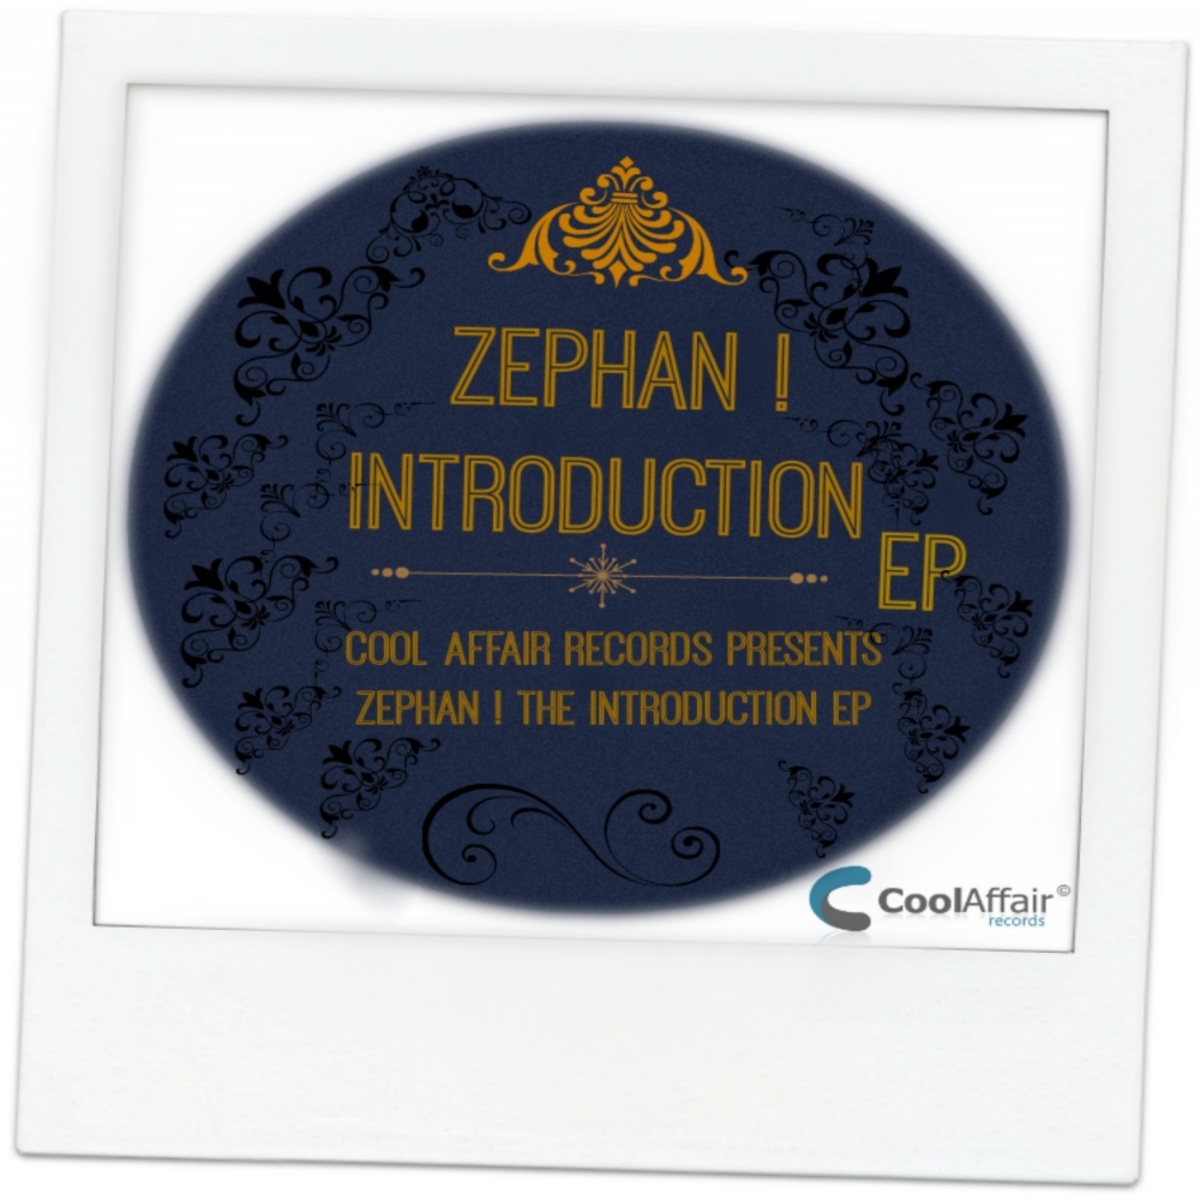 Zephan - Introduction EP / Cool Affair Records